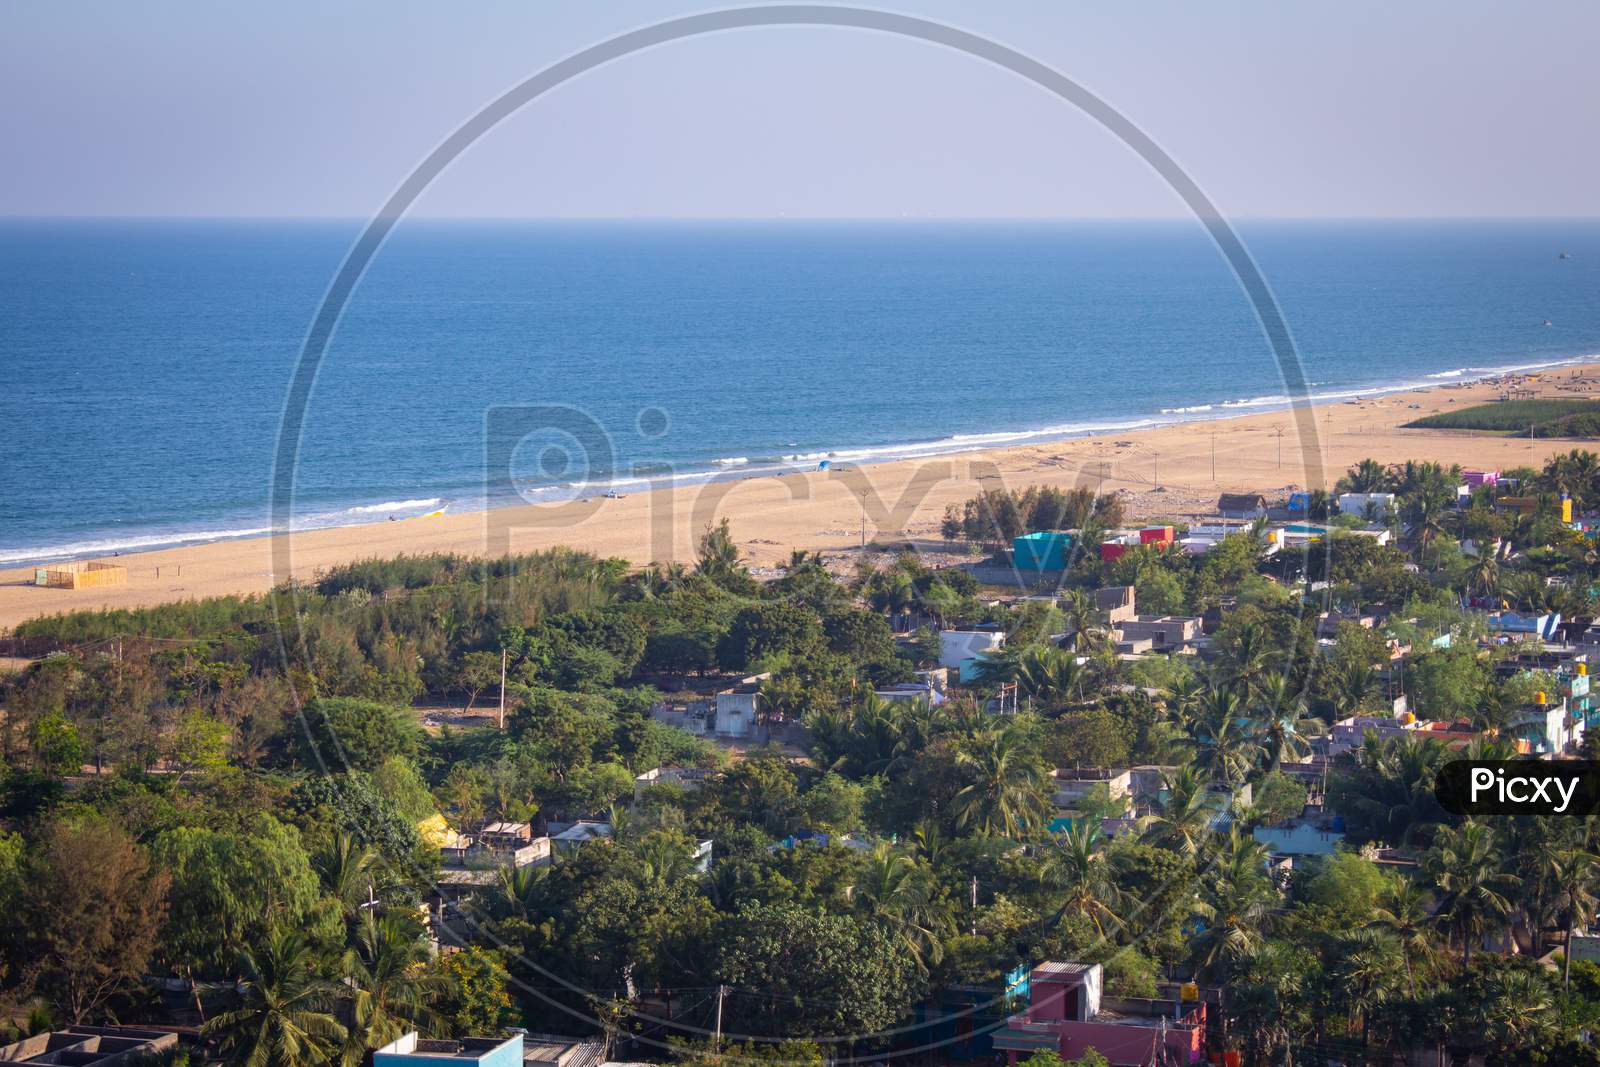 Breathtaking View Of Pulicat(Also Called As Pazhaverkadu) Village And The Bay Of Bengal Coastline, Tamil Nadu, India. Aerial View Of Pulicat Beach From Pulicat Lighthouse.